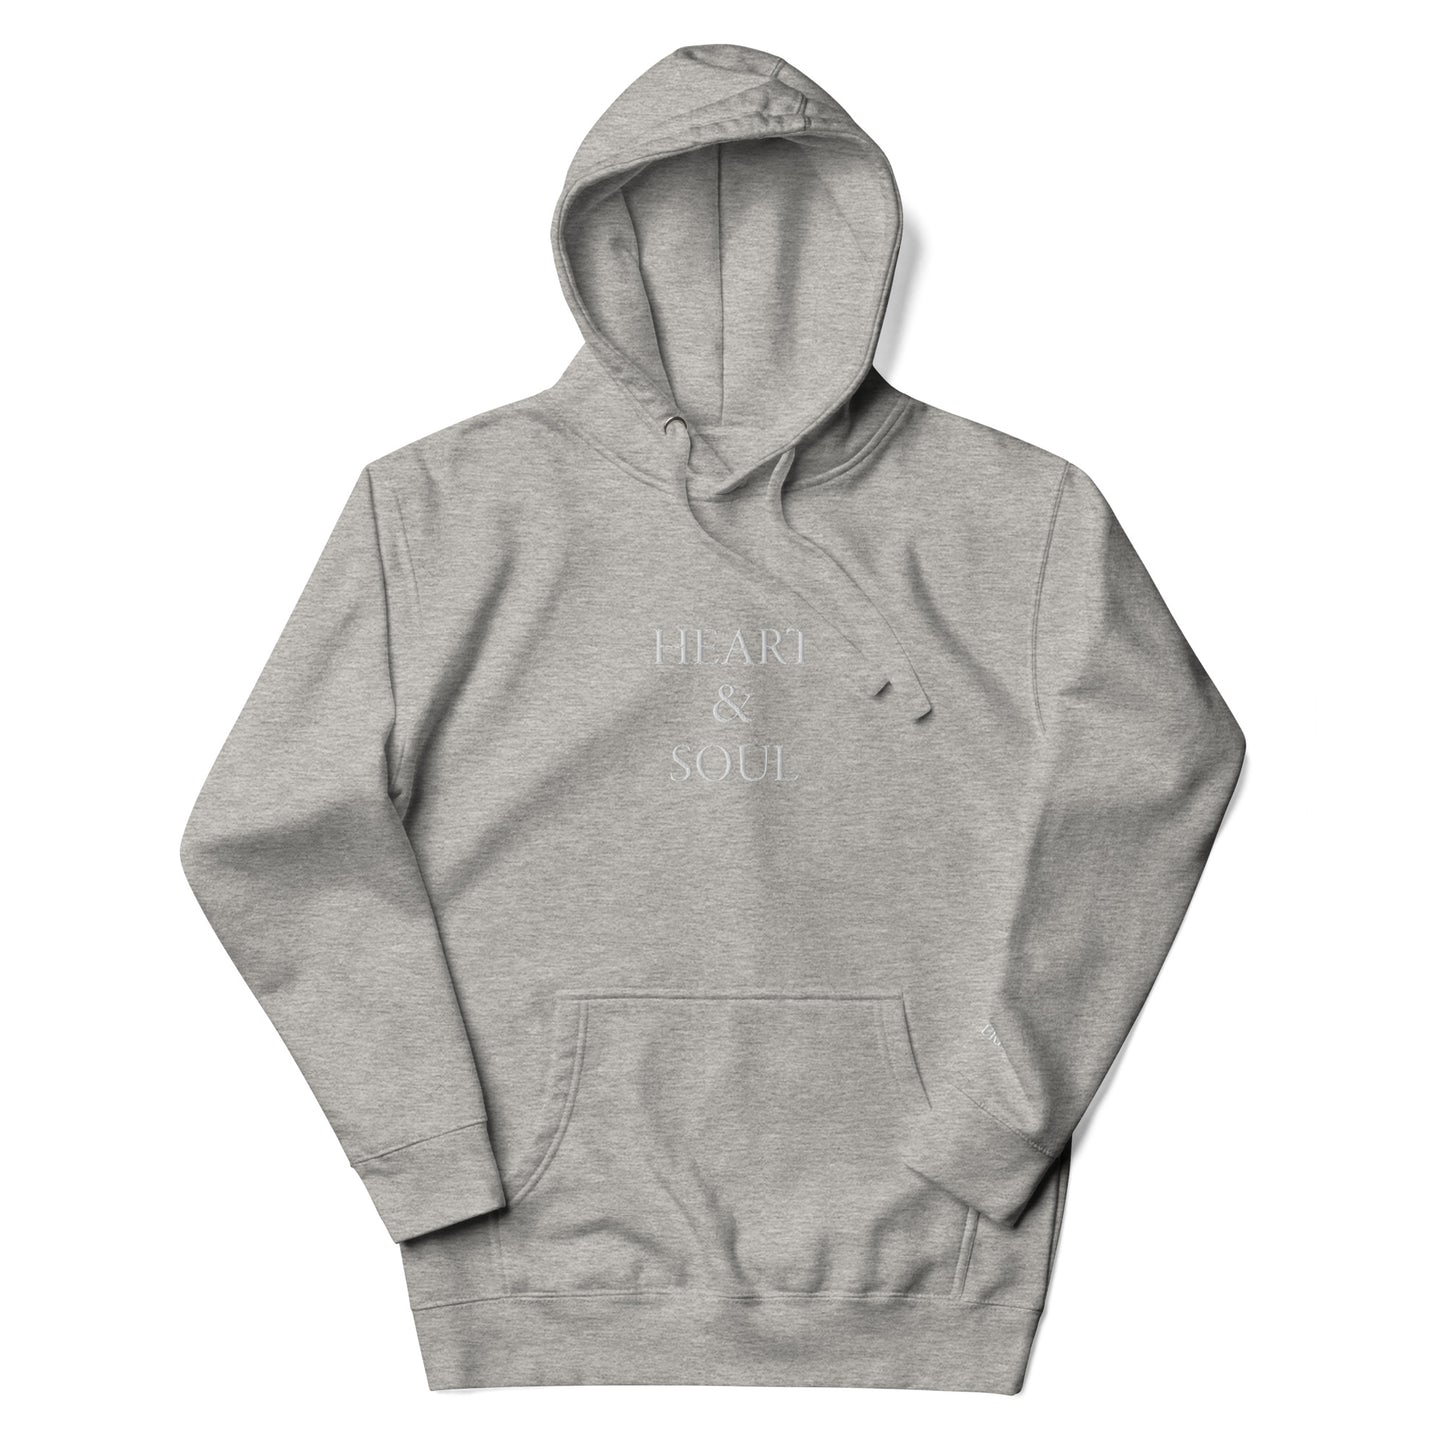 "HEART & SOUL" with "LOVE ENDURES" Embroidered Premium Hoodie (Unisex)